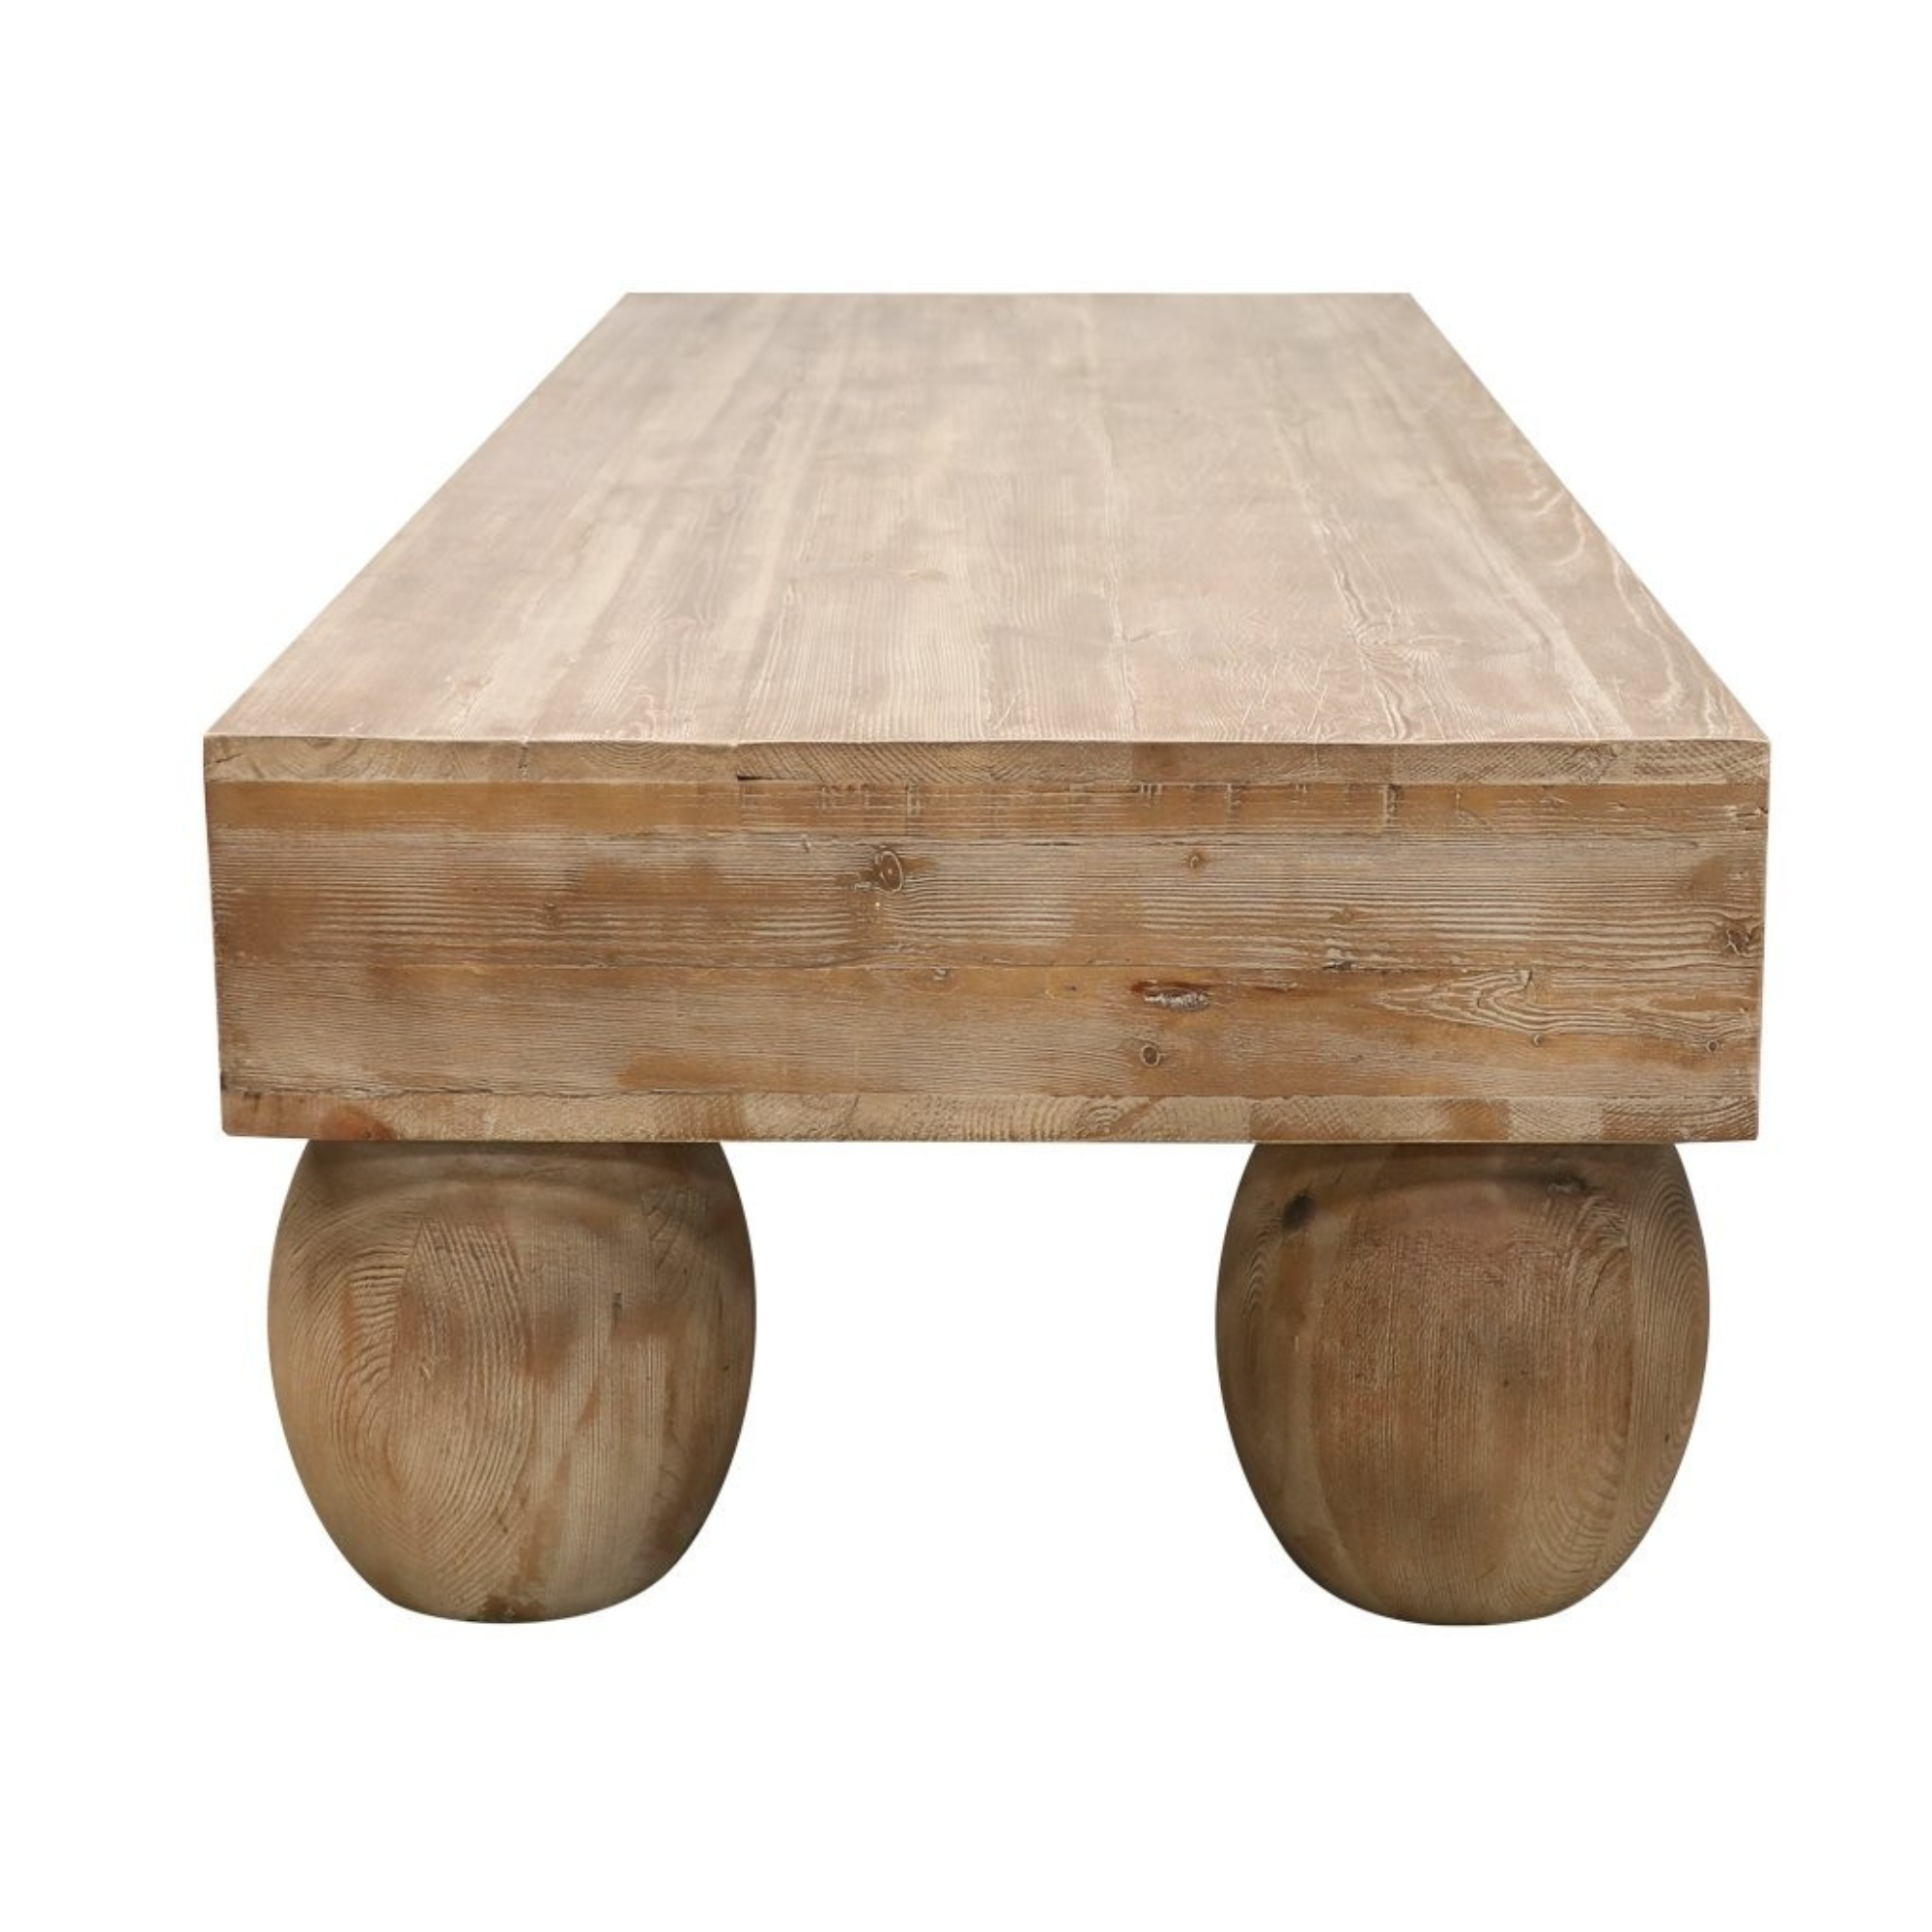 LIMITED EDITION | COFFEE TABLE